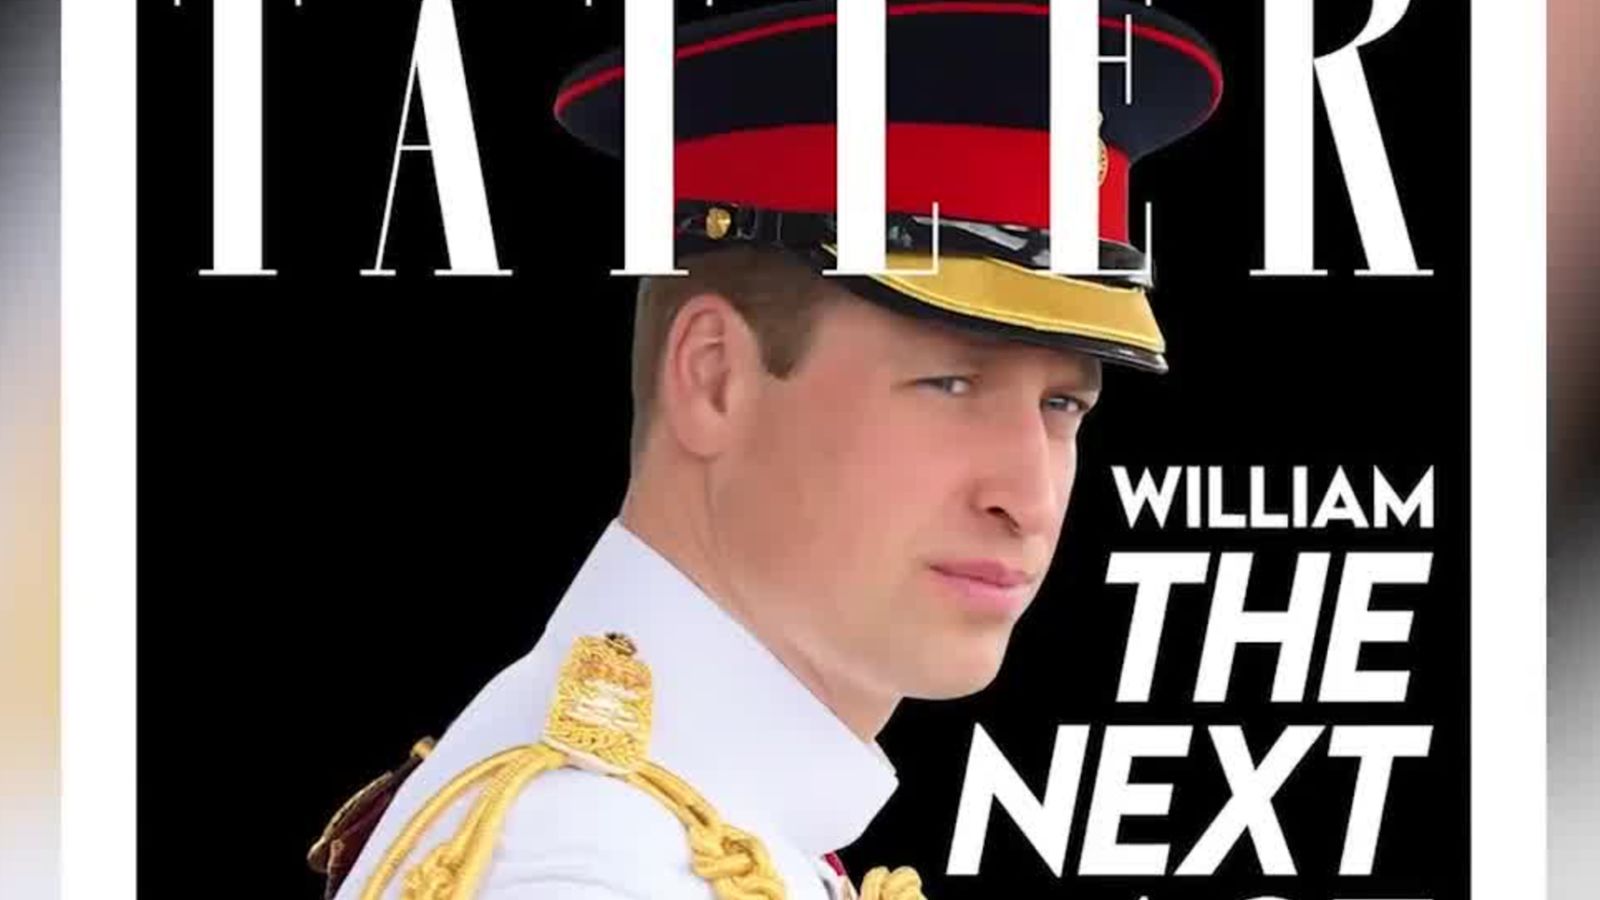 Inside Prince William's Next Act